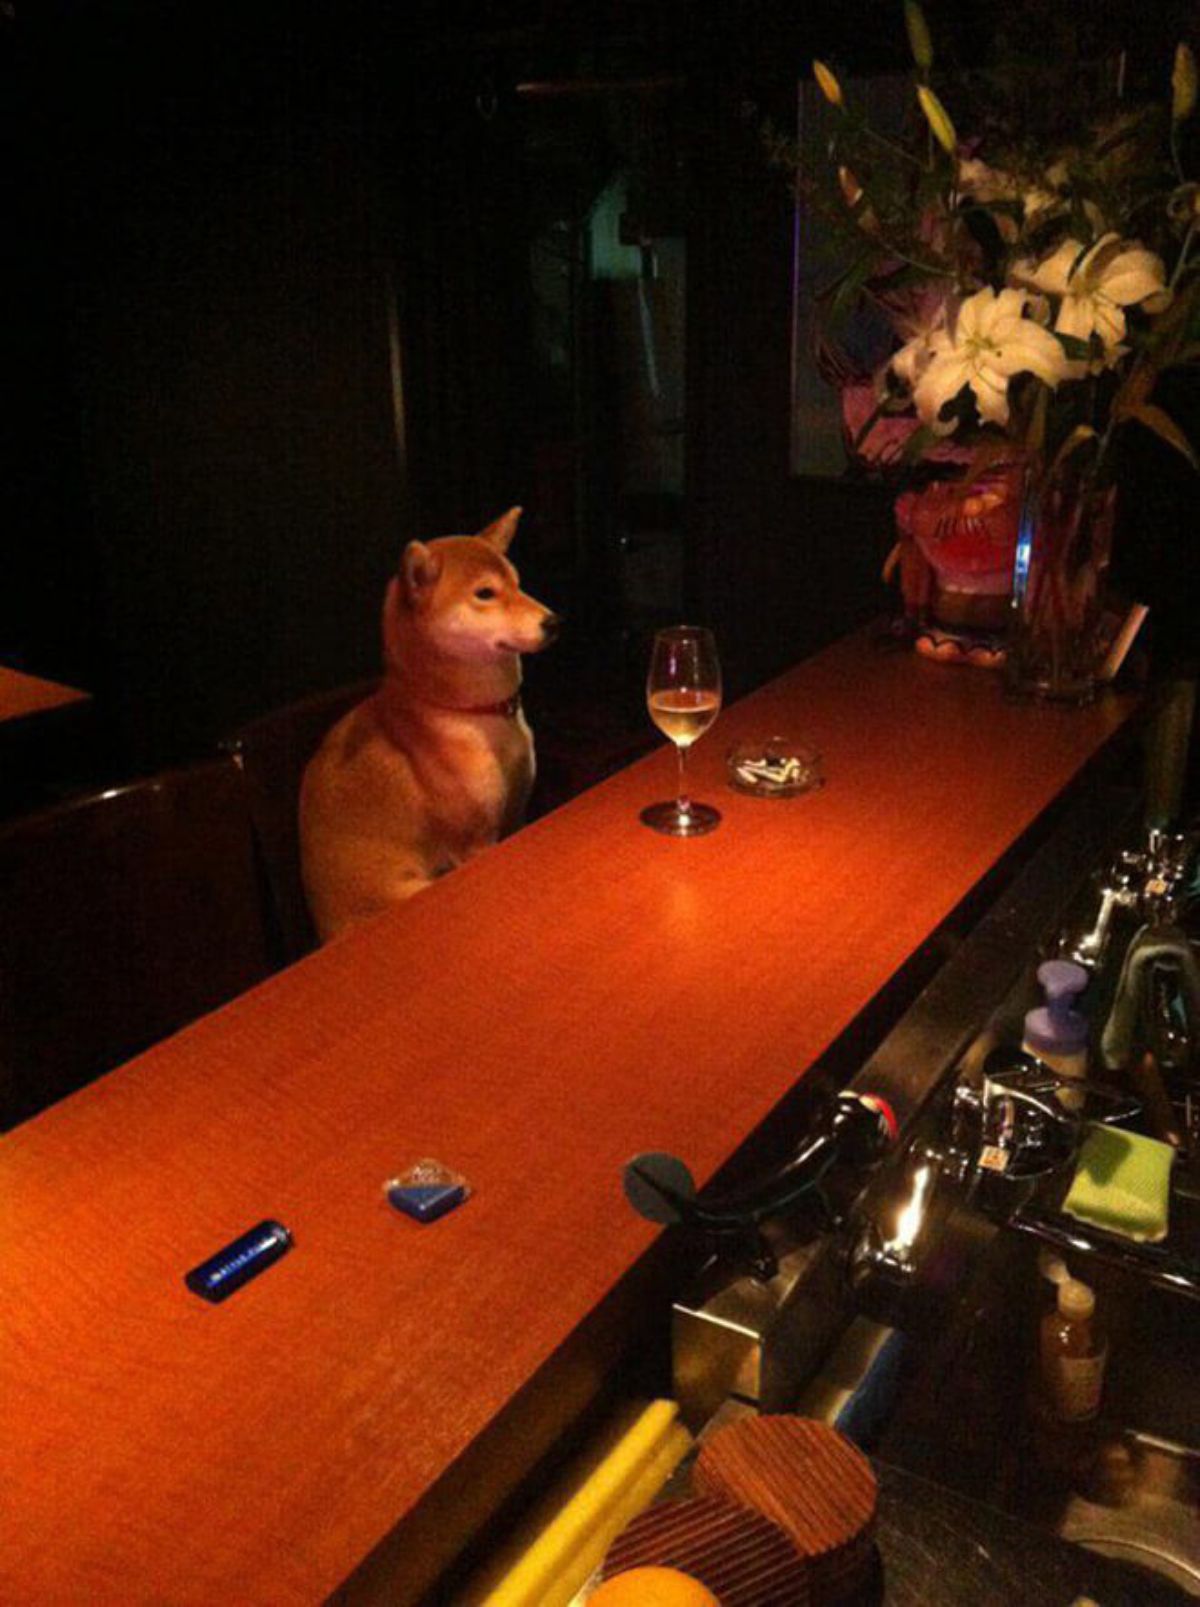 brown and white shiba inu sitting at a bar with a glass of alcohol in front of it